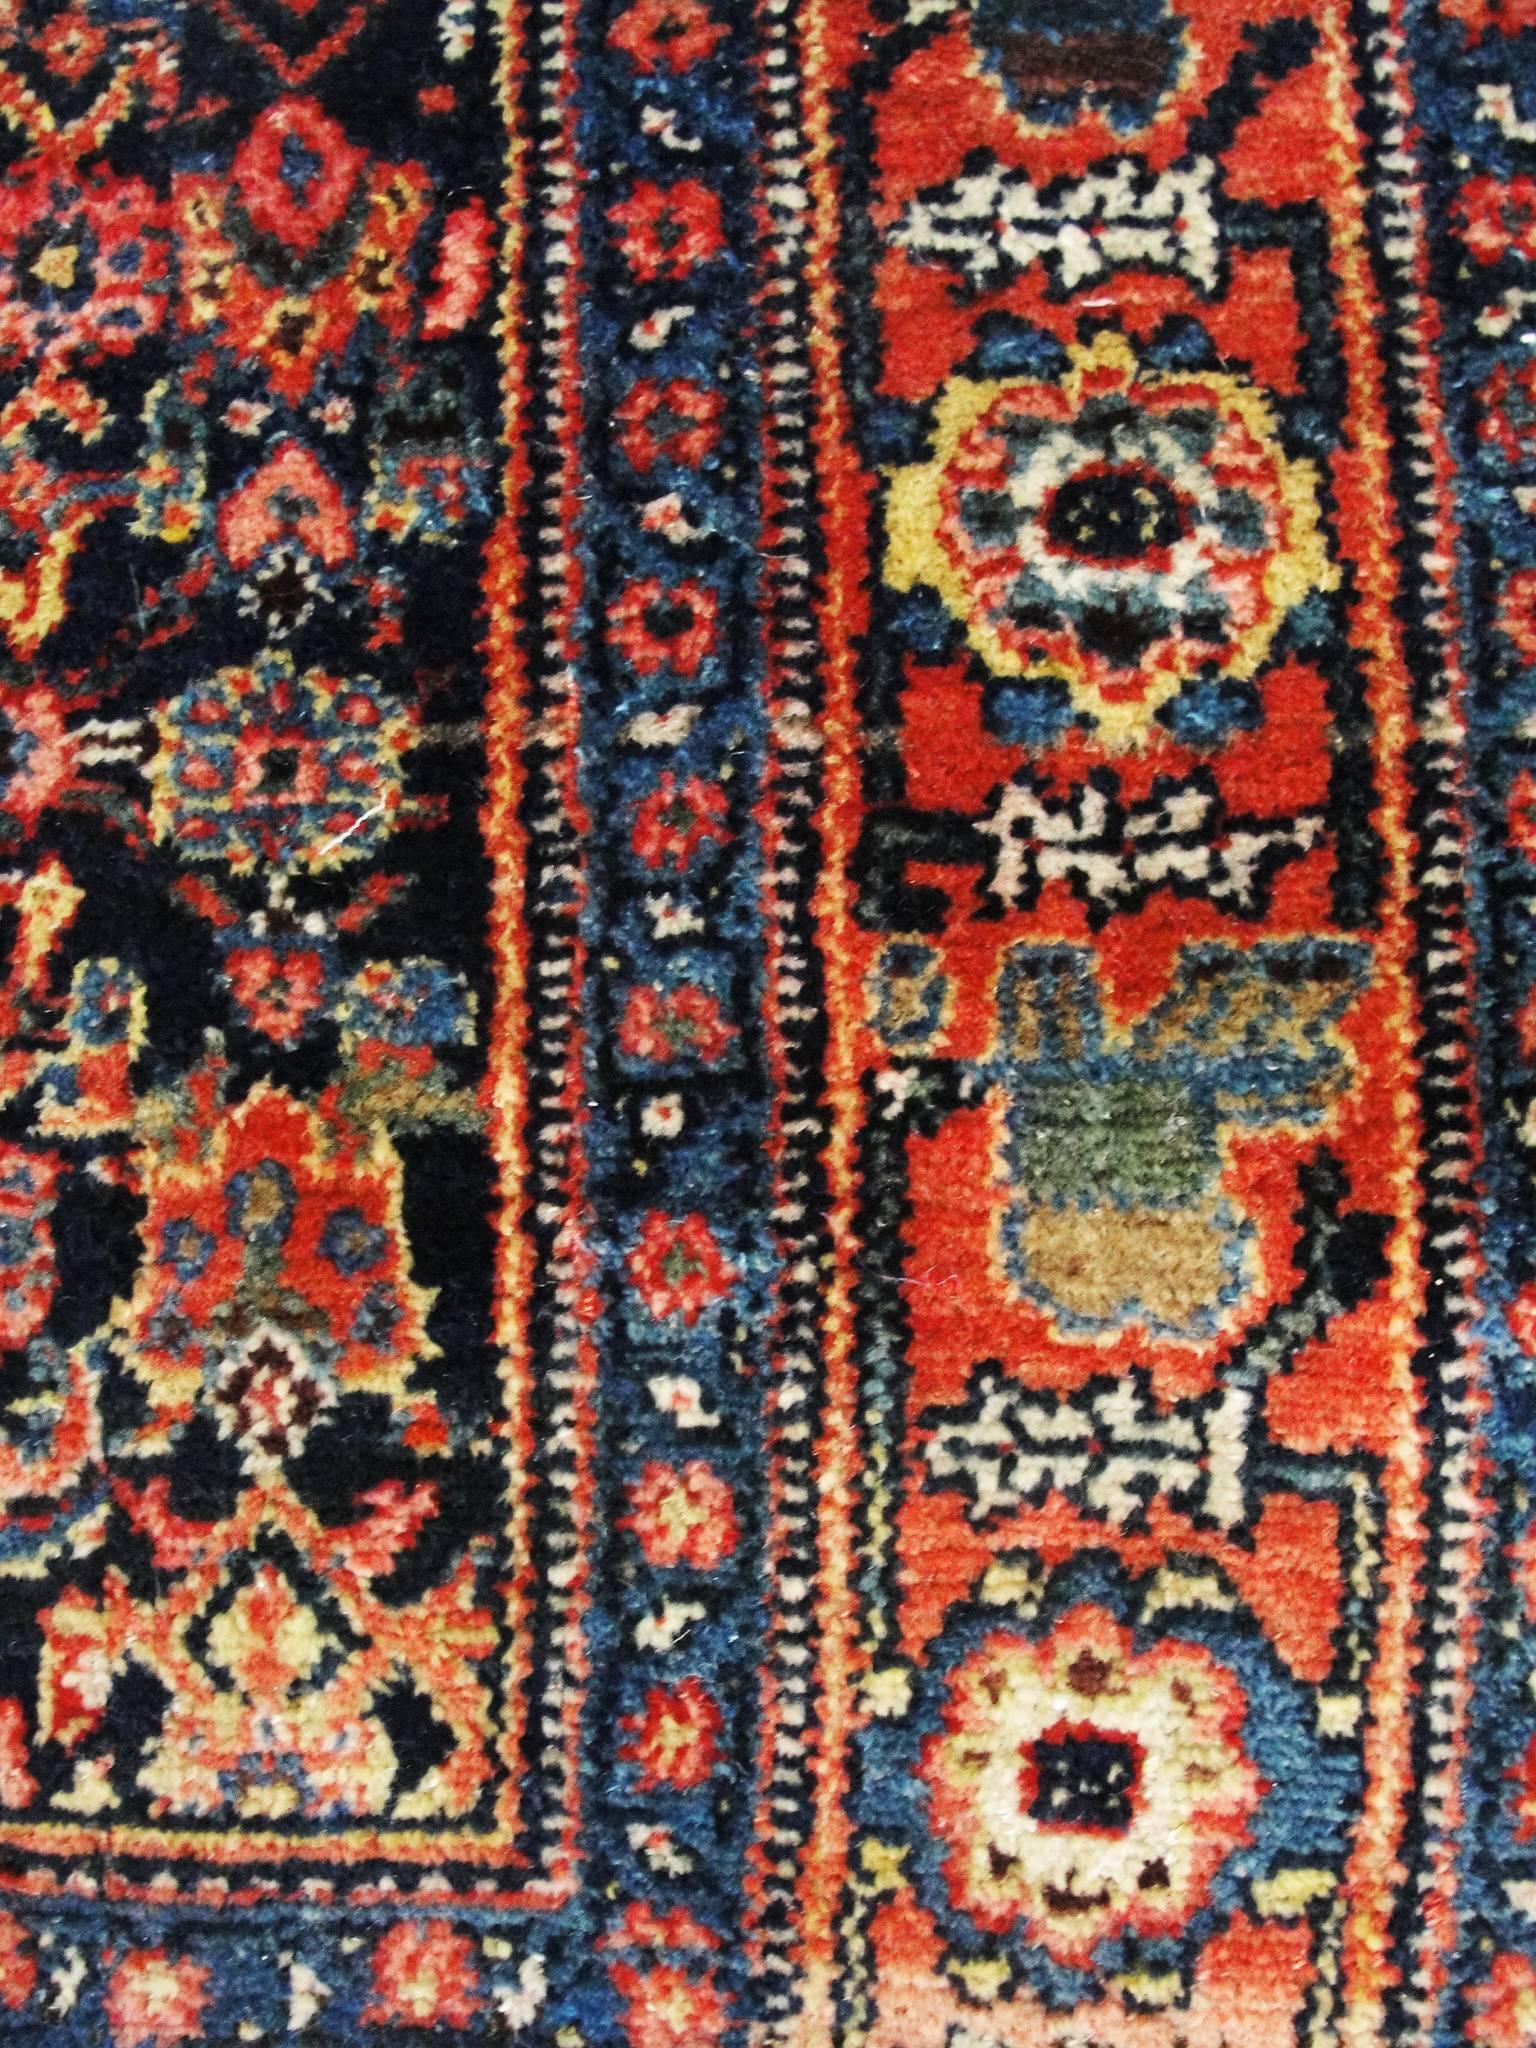 Early 20th Century Antique Persian Senneh Rug, 4'6